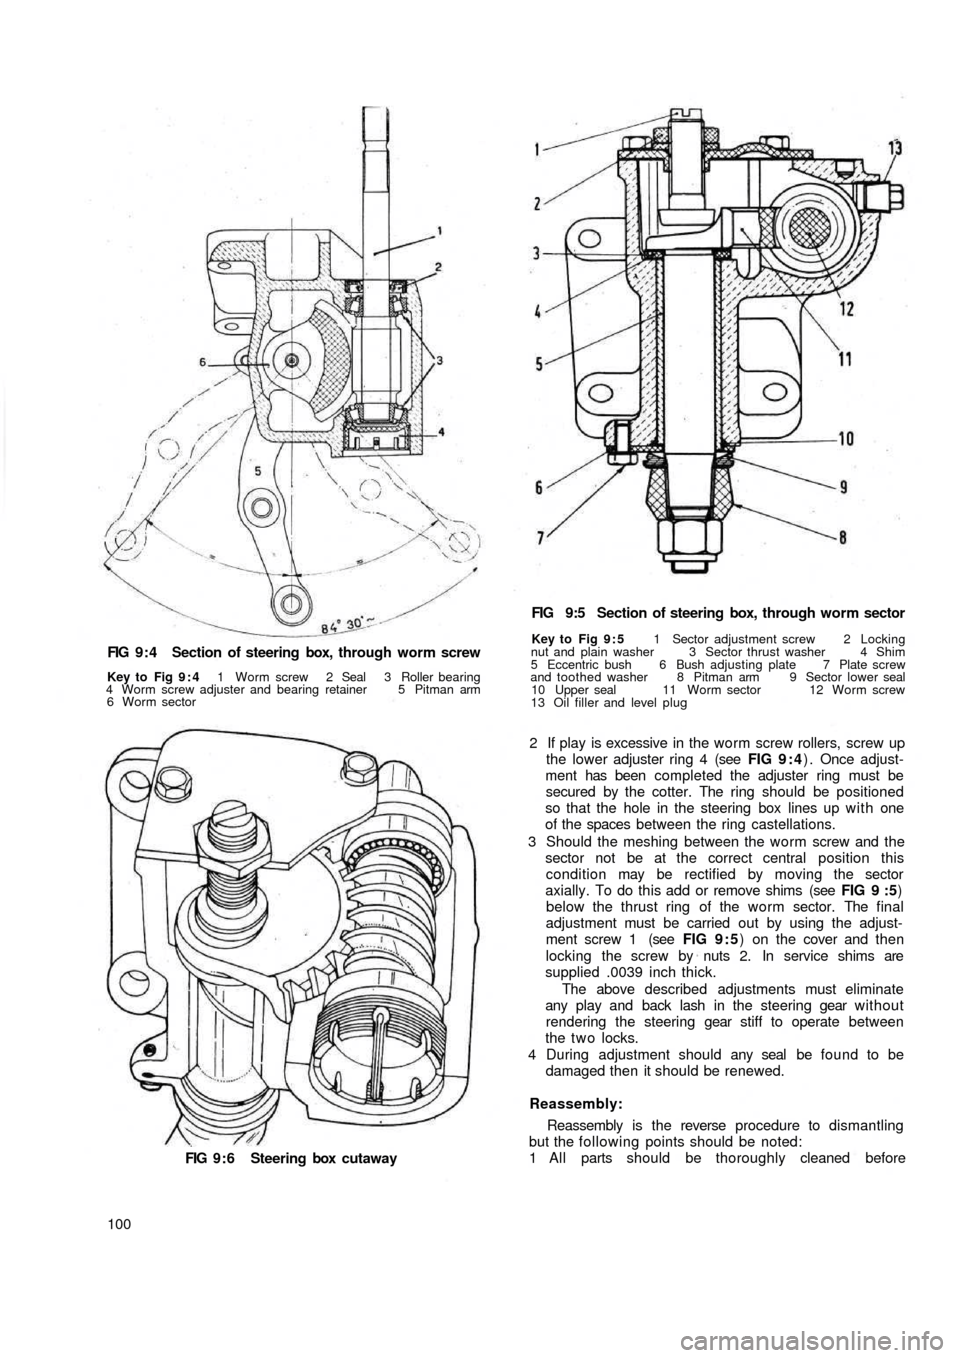 FIAT 500 1964 1.G Workshop Manual FIG 9 : 4  Section of steering box,  through worm screw
Key to  Fig 9 : 4 1 Worm screw 2 Seal 3 Roller bearing
4 Worm screw adjuster and bearing retainer 5 Pitman arm
6 Worm sector
FIG 9 : 6  Steering